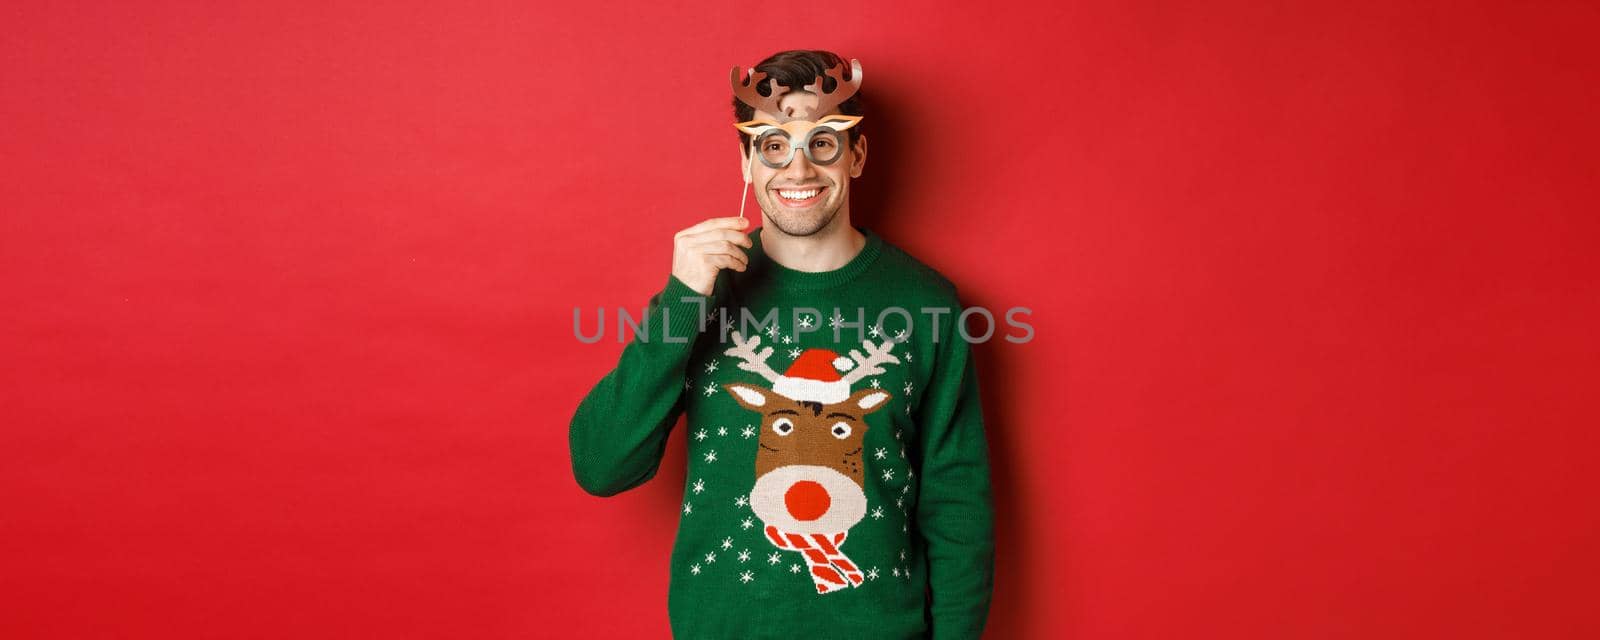 Handsome happy man in christmas sweater, holding party mask and smiling, enjoying new year celebration, standing over red background.